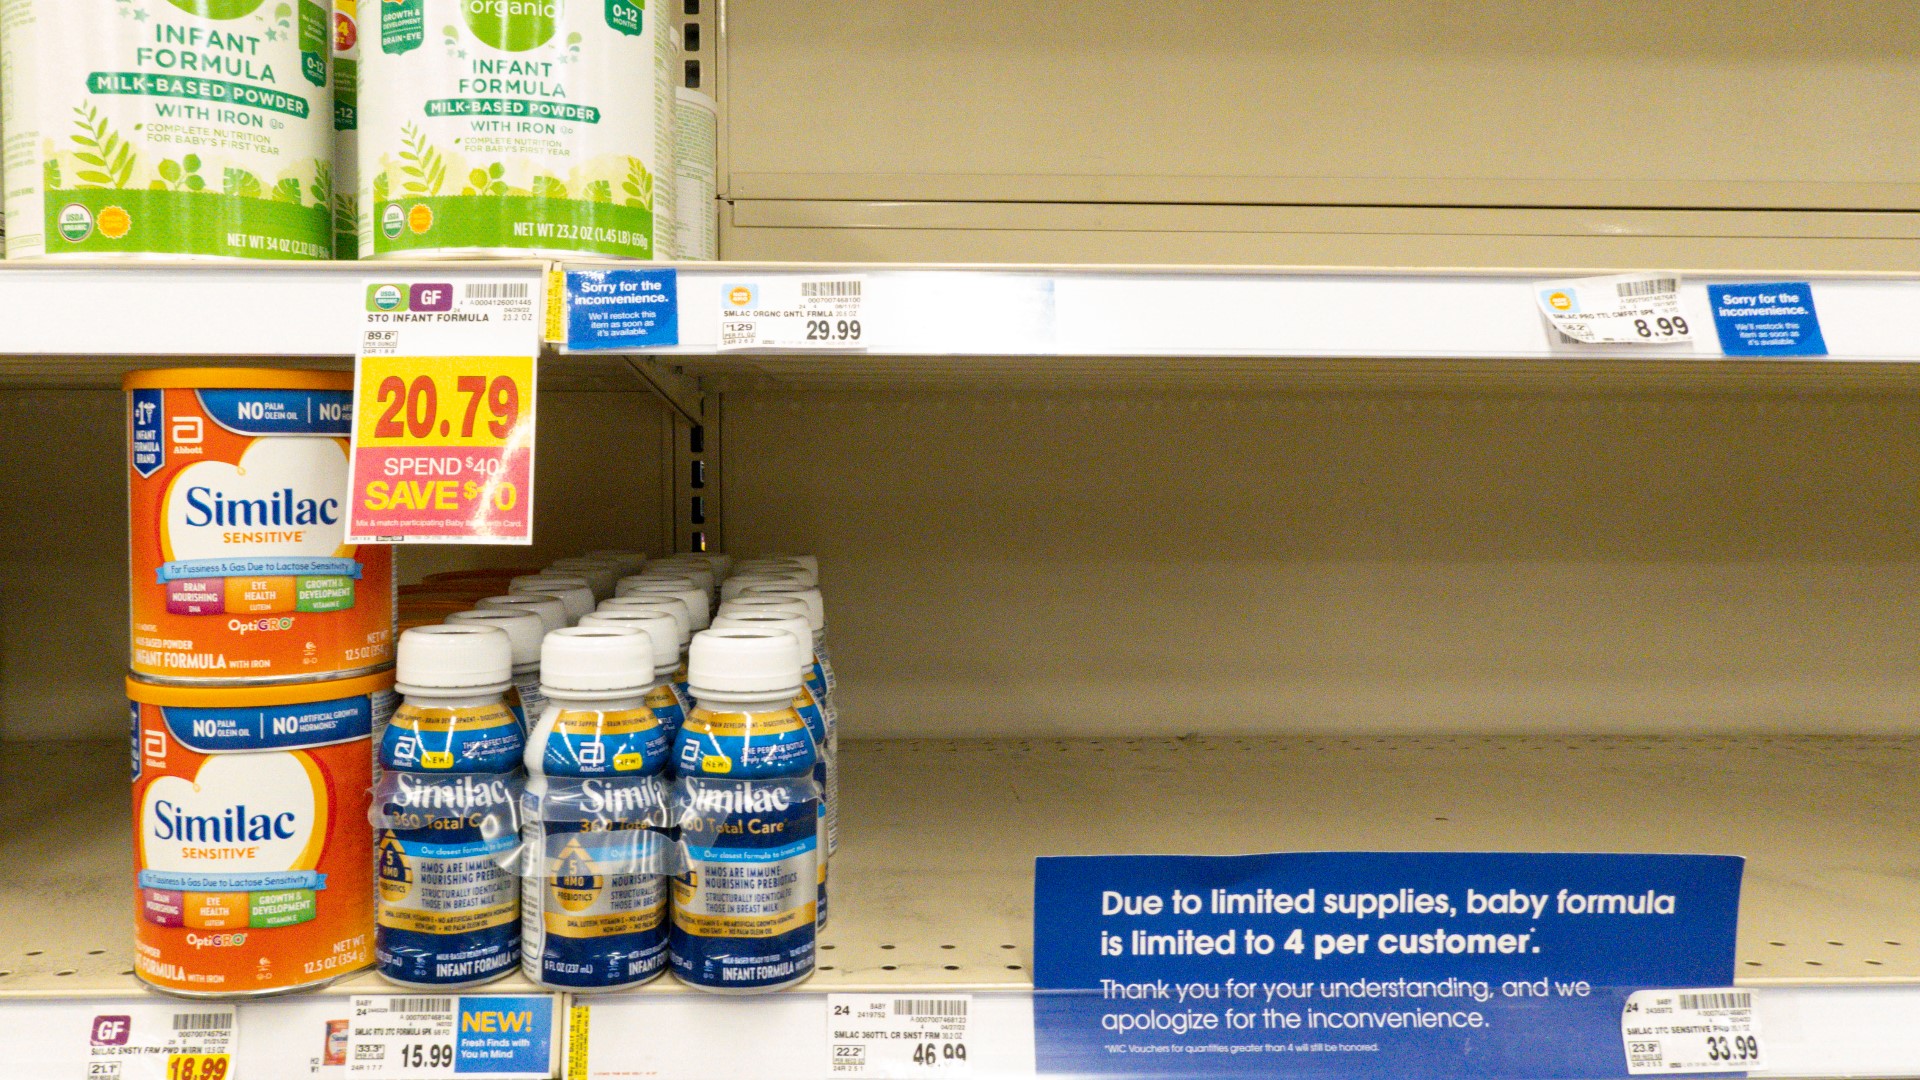 Previously a federal guideline required Georgia's Women, Infants, and Children program, known as WIC to toss unused and sealed baby formula that was returned.